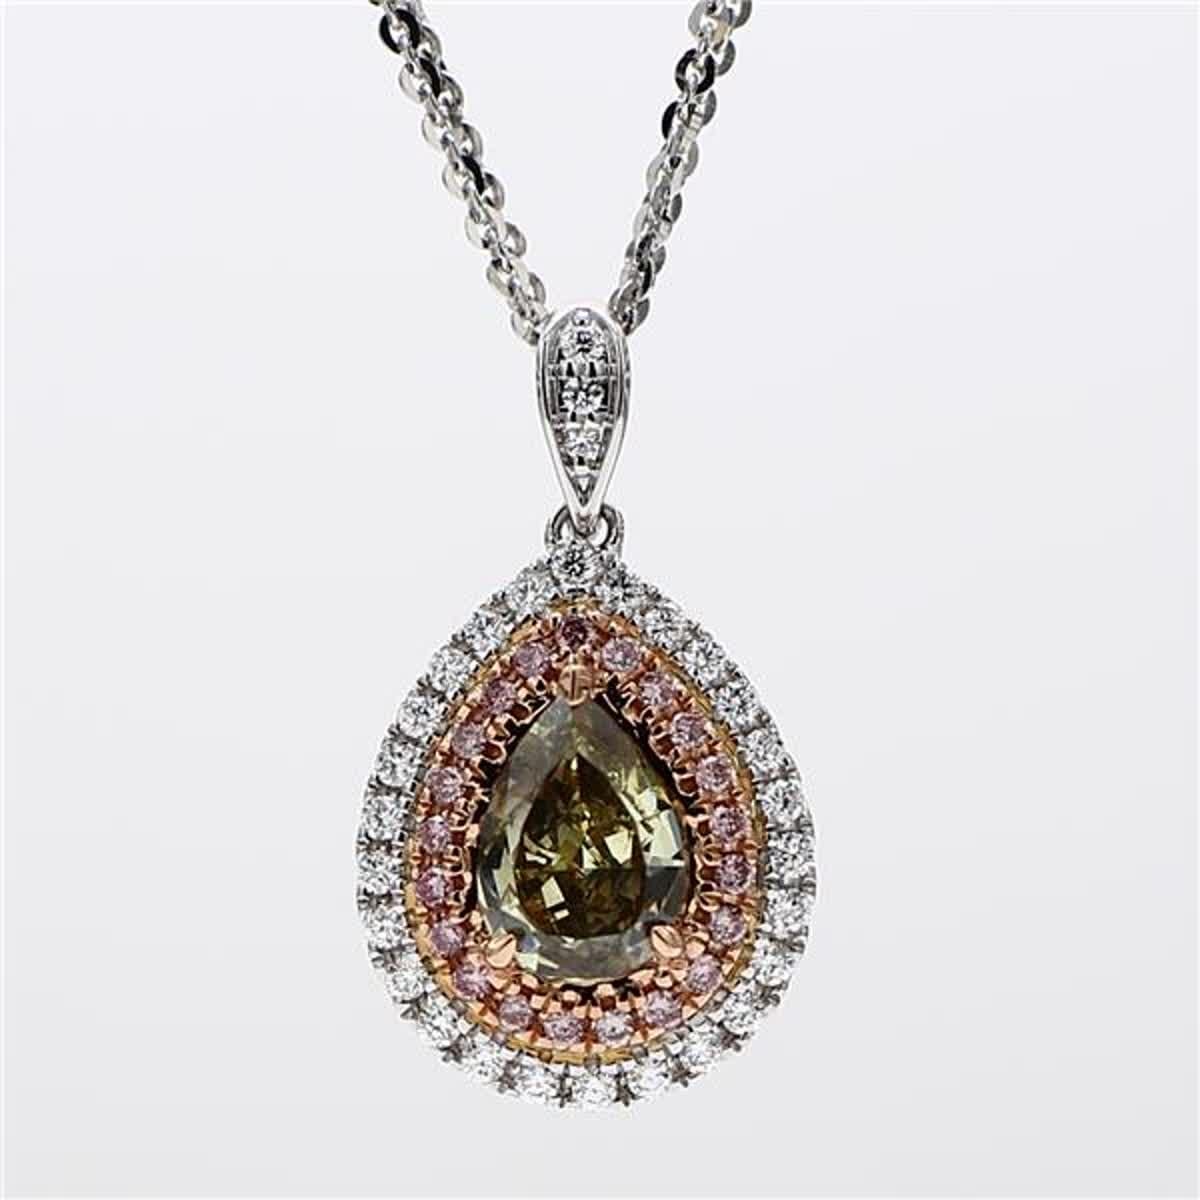 RareGemWorld's GIA certified diamond pendant. Mounted in a beautiful 18K Rose and White Gold setting with a natural pear cut brown diamond. The brown diamond is surrounded by natural round pink diamond melee and natural round white diamond melee.